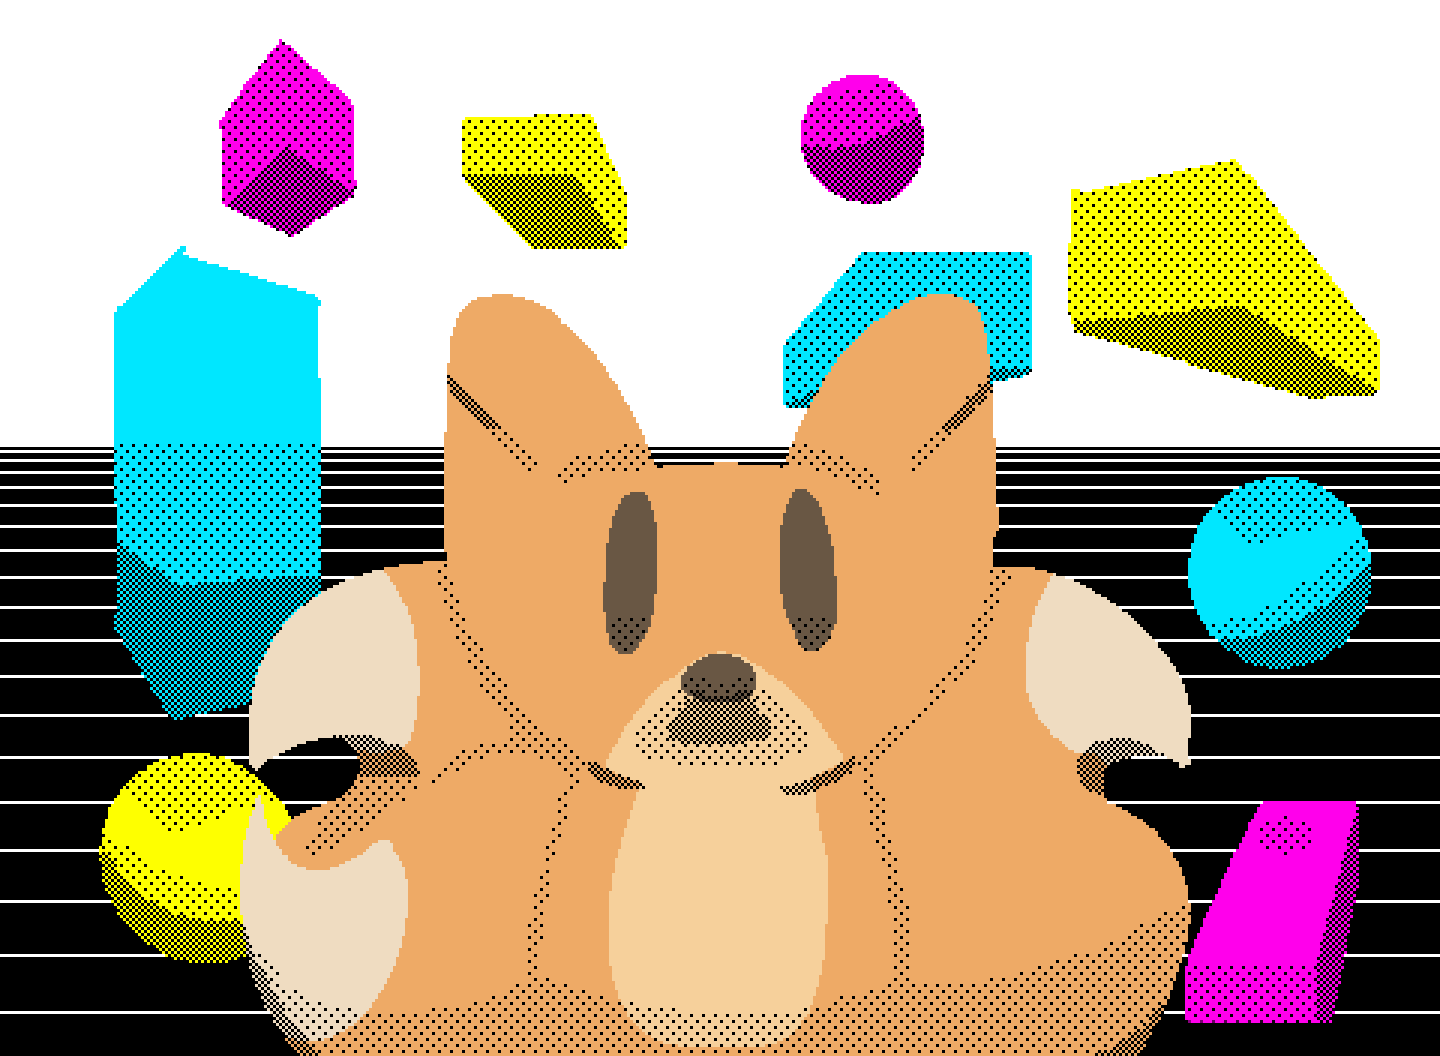 beefox, in a world with cubes and spheres, with dithered shadows. Limited colour pallete